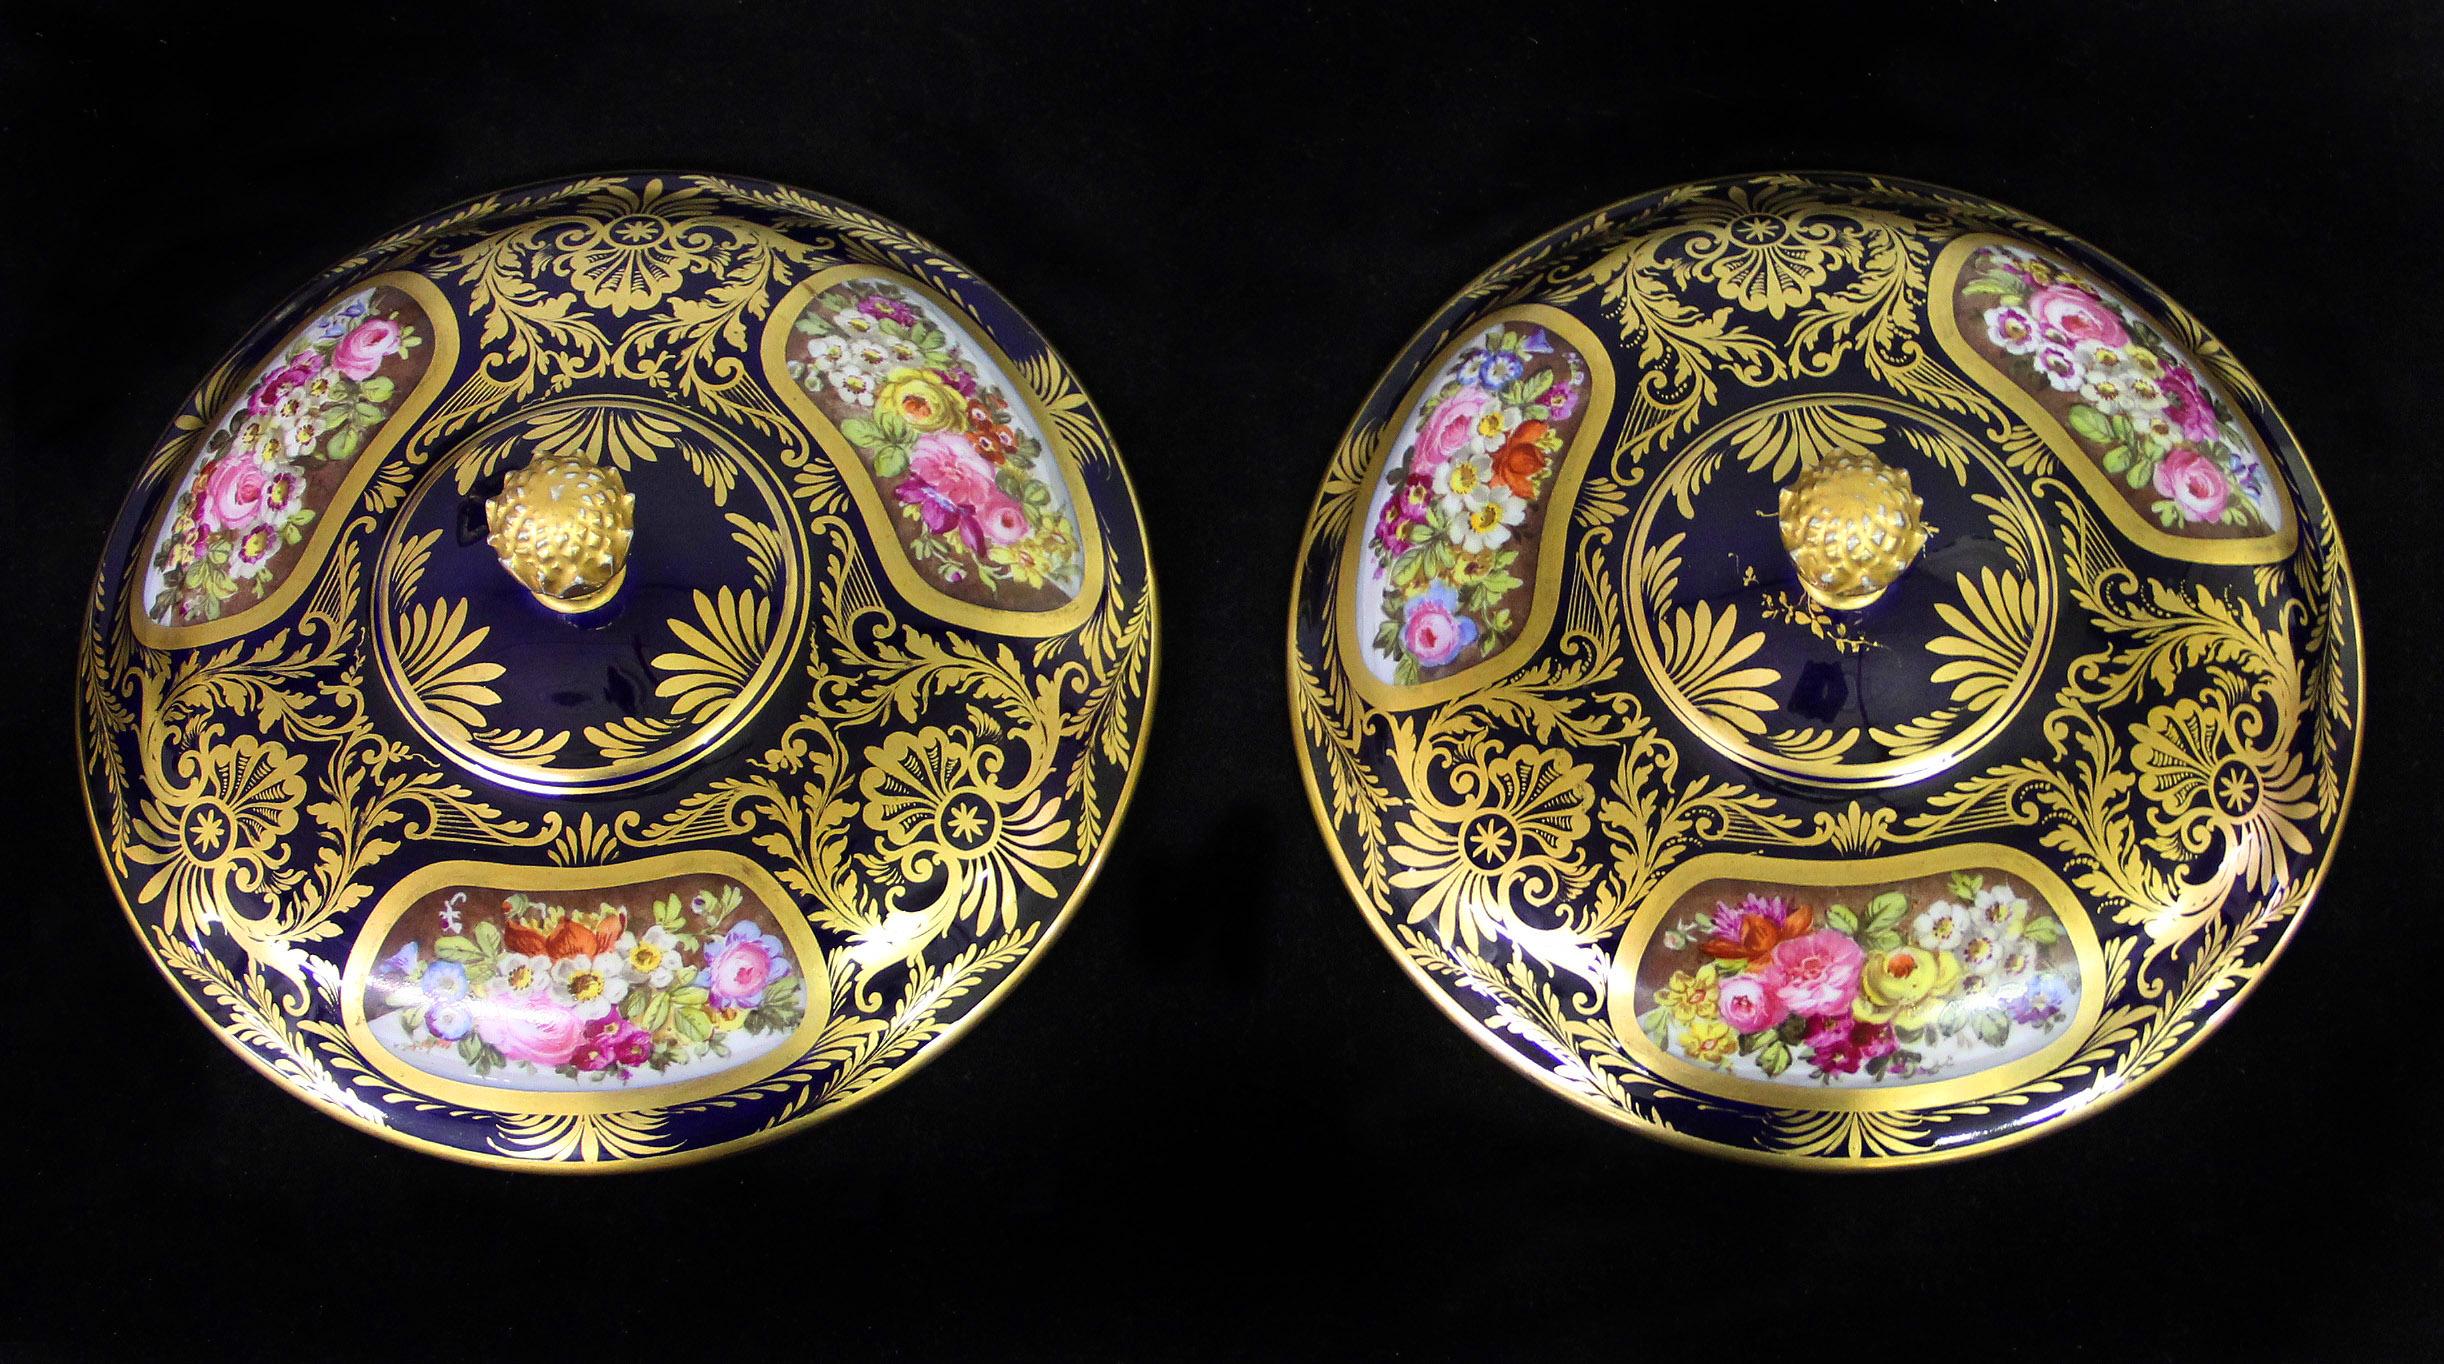 Hand-Painted Beautiful Pair of Late 18th-Early 19th Century Crown Derby Porcelain Vases